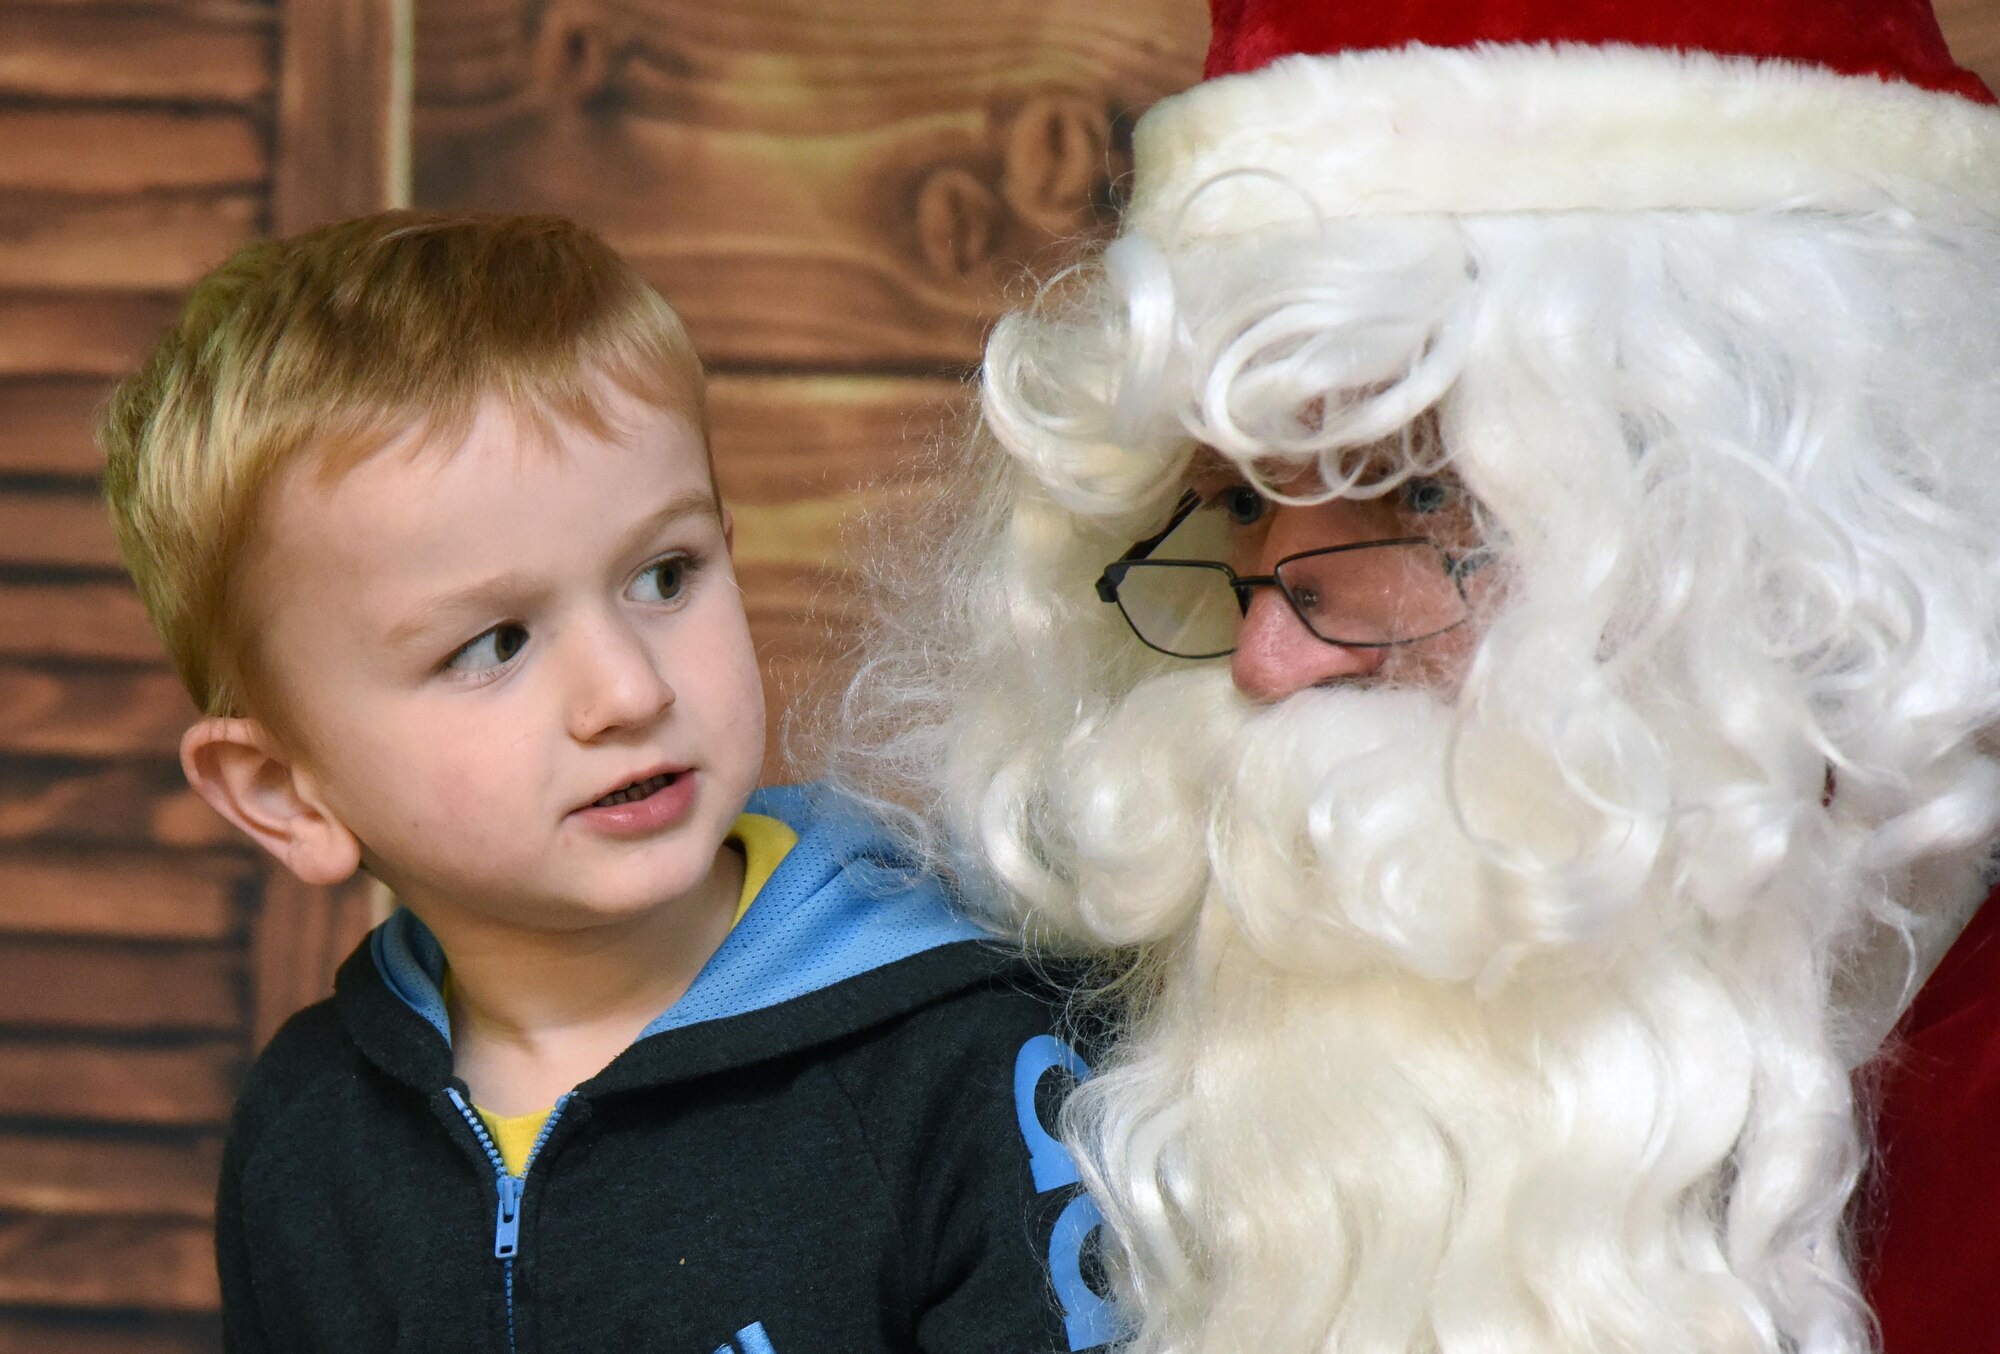 Logan Partin, son of U.S. Air Force Master Sgt. Troy Partin, 334th Training Squadron course developer writer, visits with Santa during Christmas in the Park at Keesler Air Force Base, Mississippi, Dec. 6, 2018. The event hosted by Outdoor Recreation included cookie and ornament decorating, games and visits with Santa. (U.S. Air Force photo by Kemberly Groue)